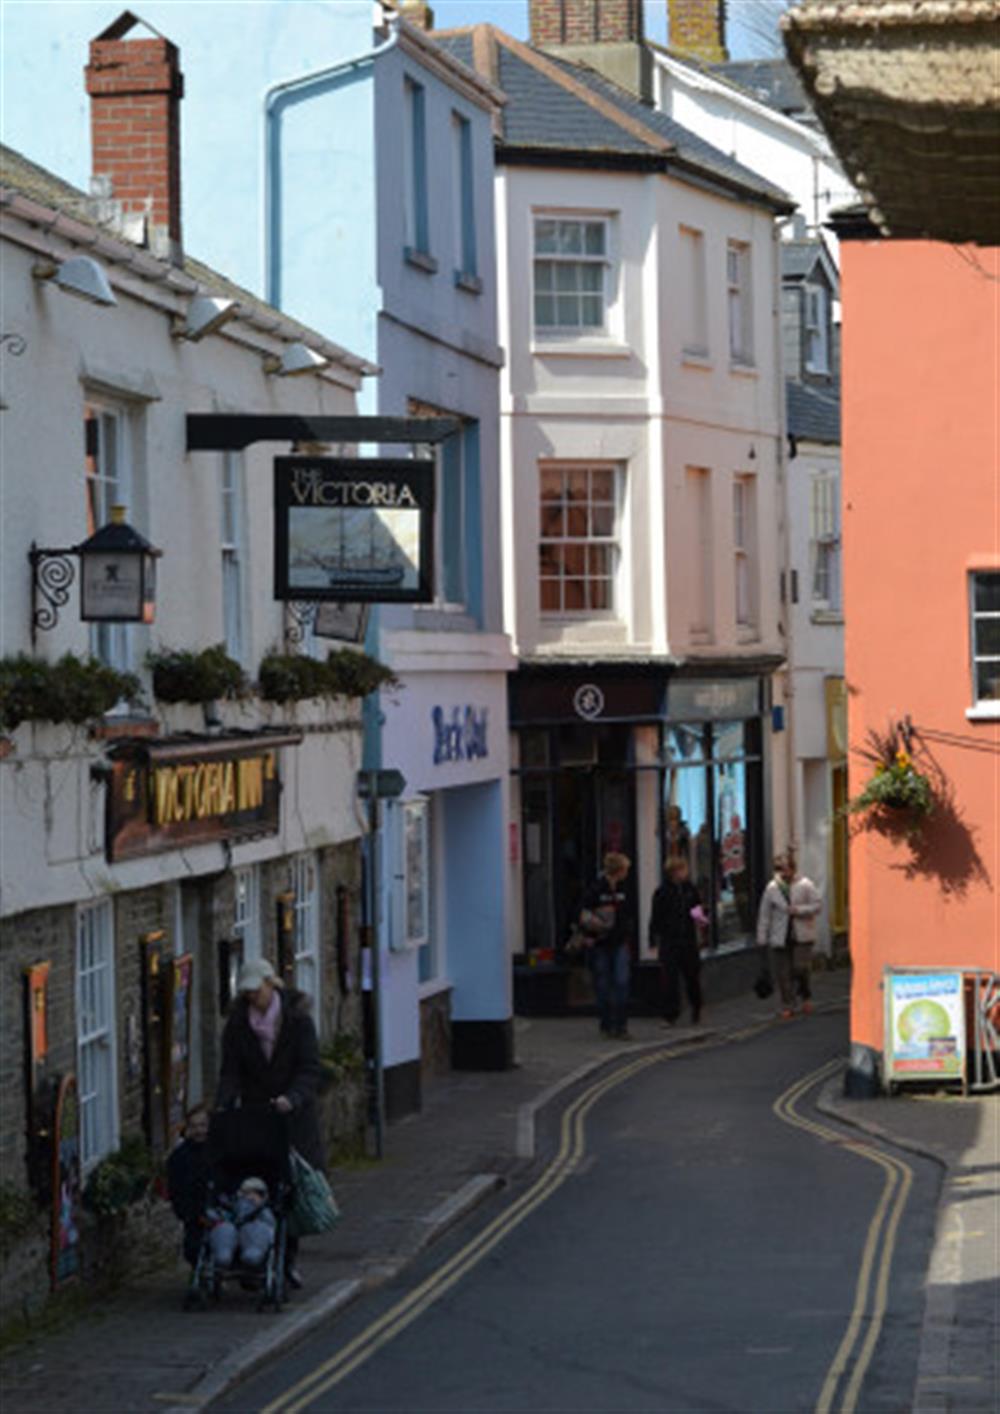 Great pubs and shops within very easy walking distance at Harbour View Apartment in Salcombe